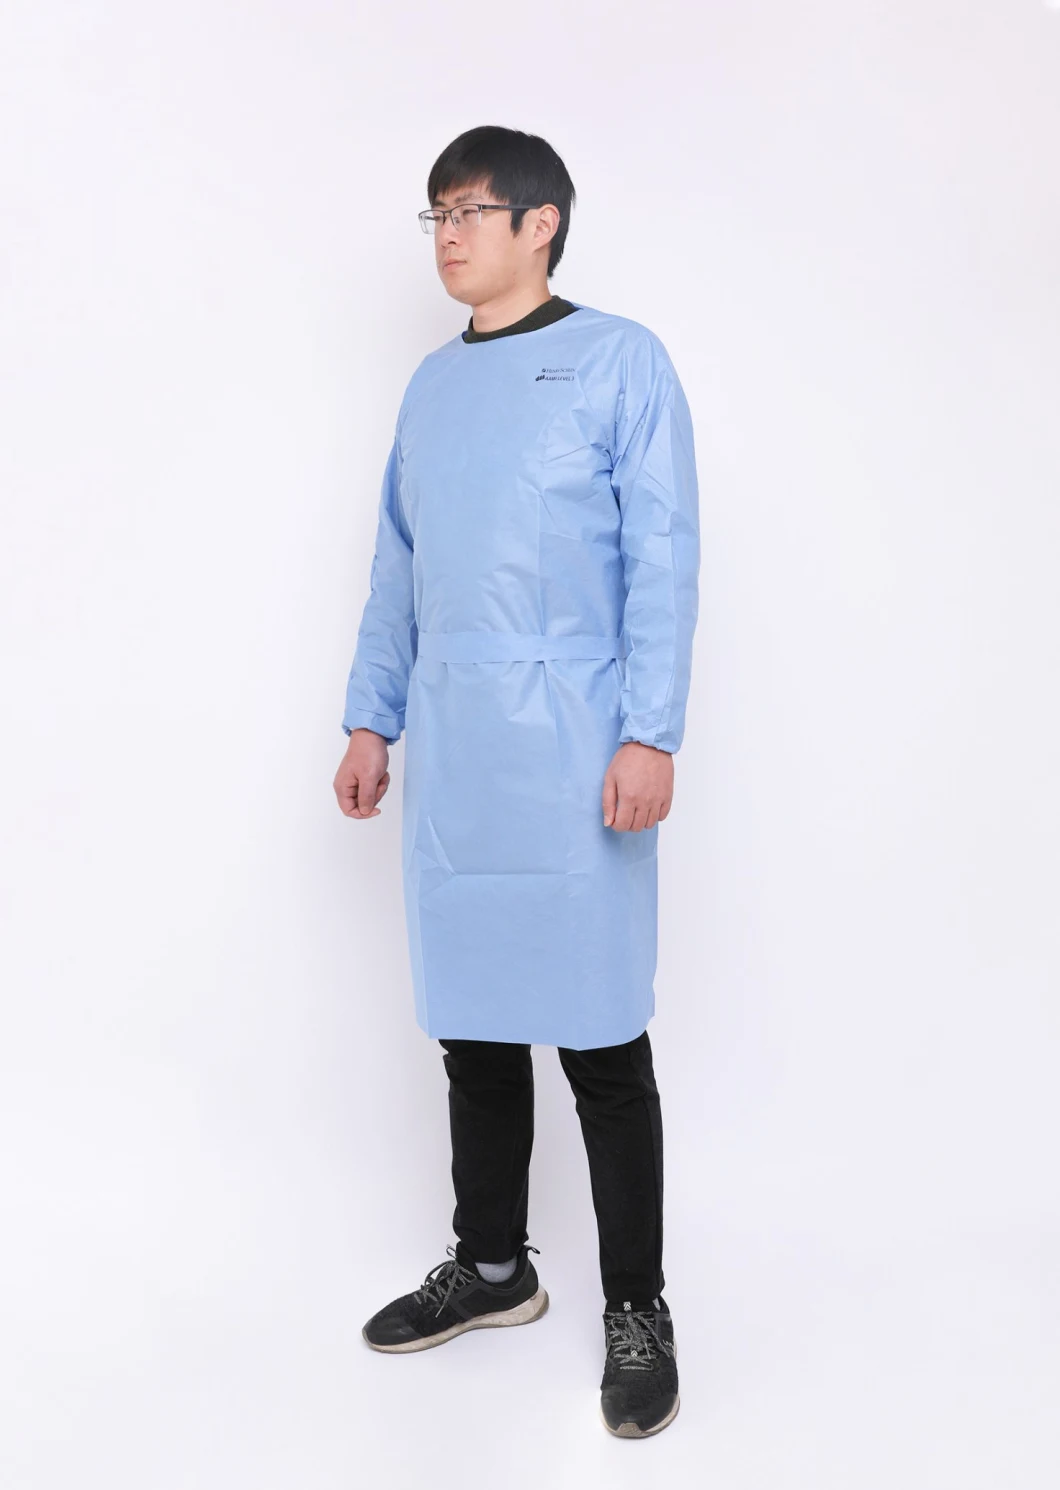 Customize Disposable White Clothing Wear Suit Safety Working Clothes Construction Worker Garment Protective Overall SMS